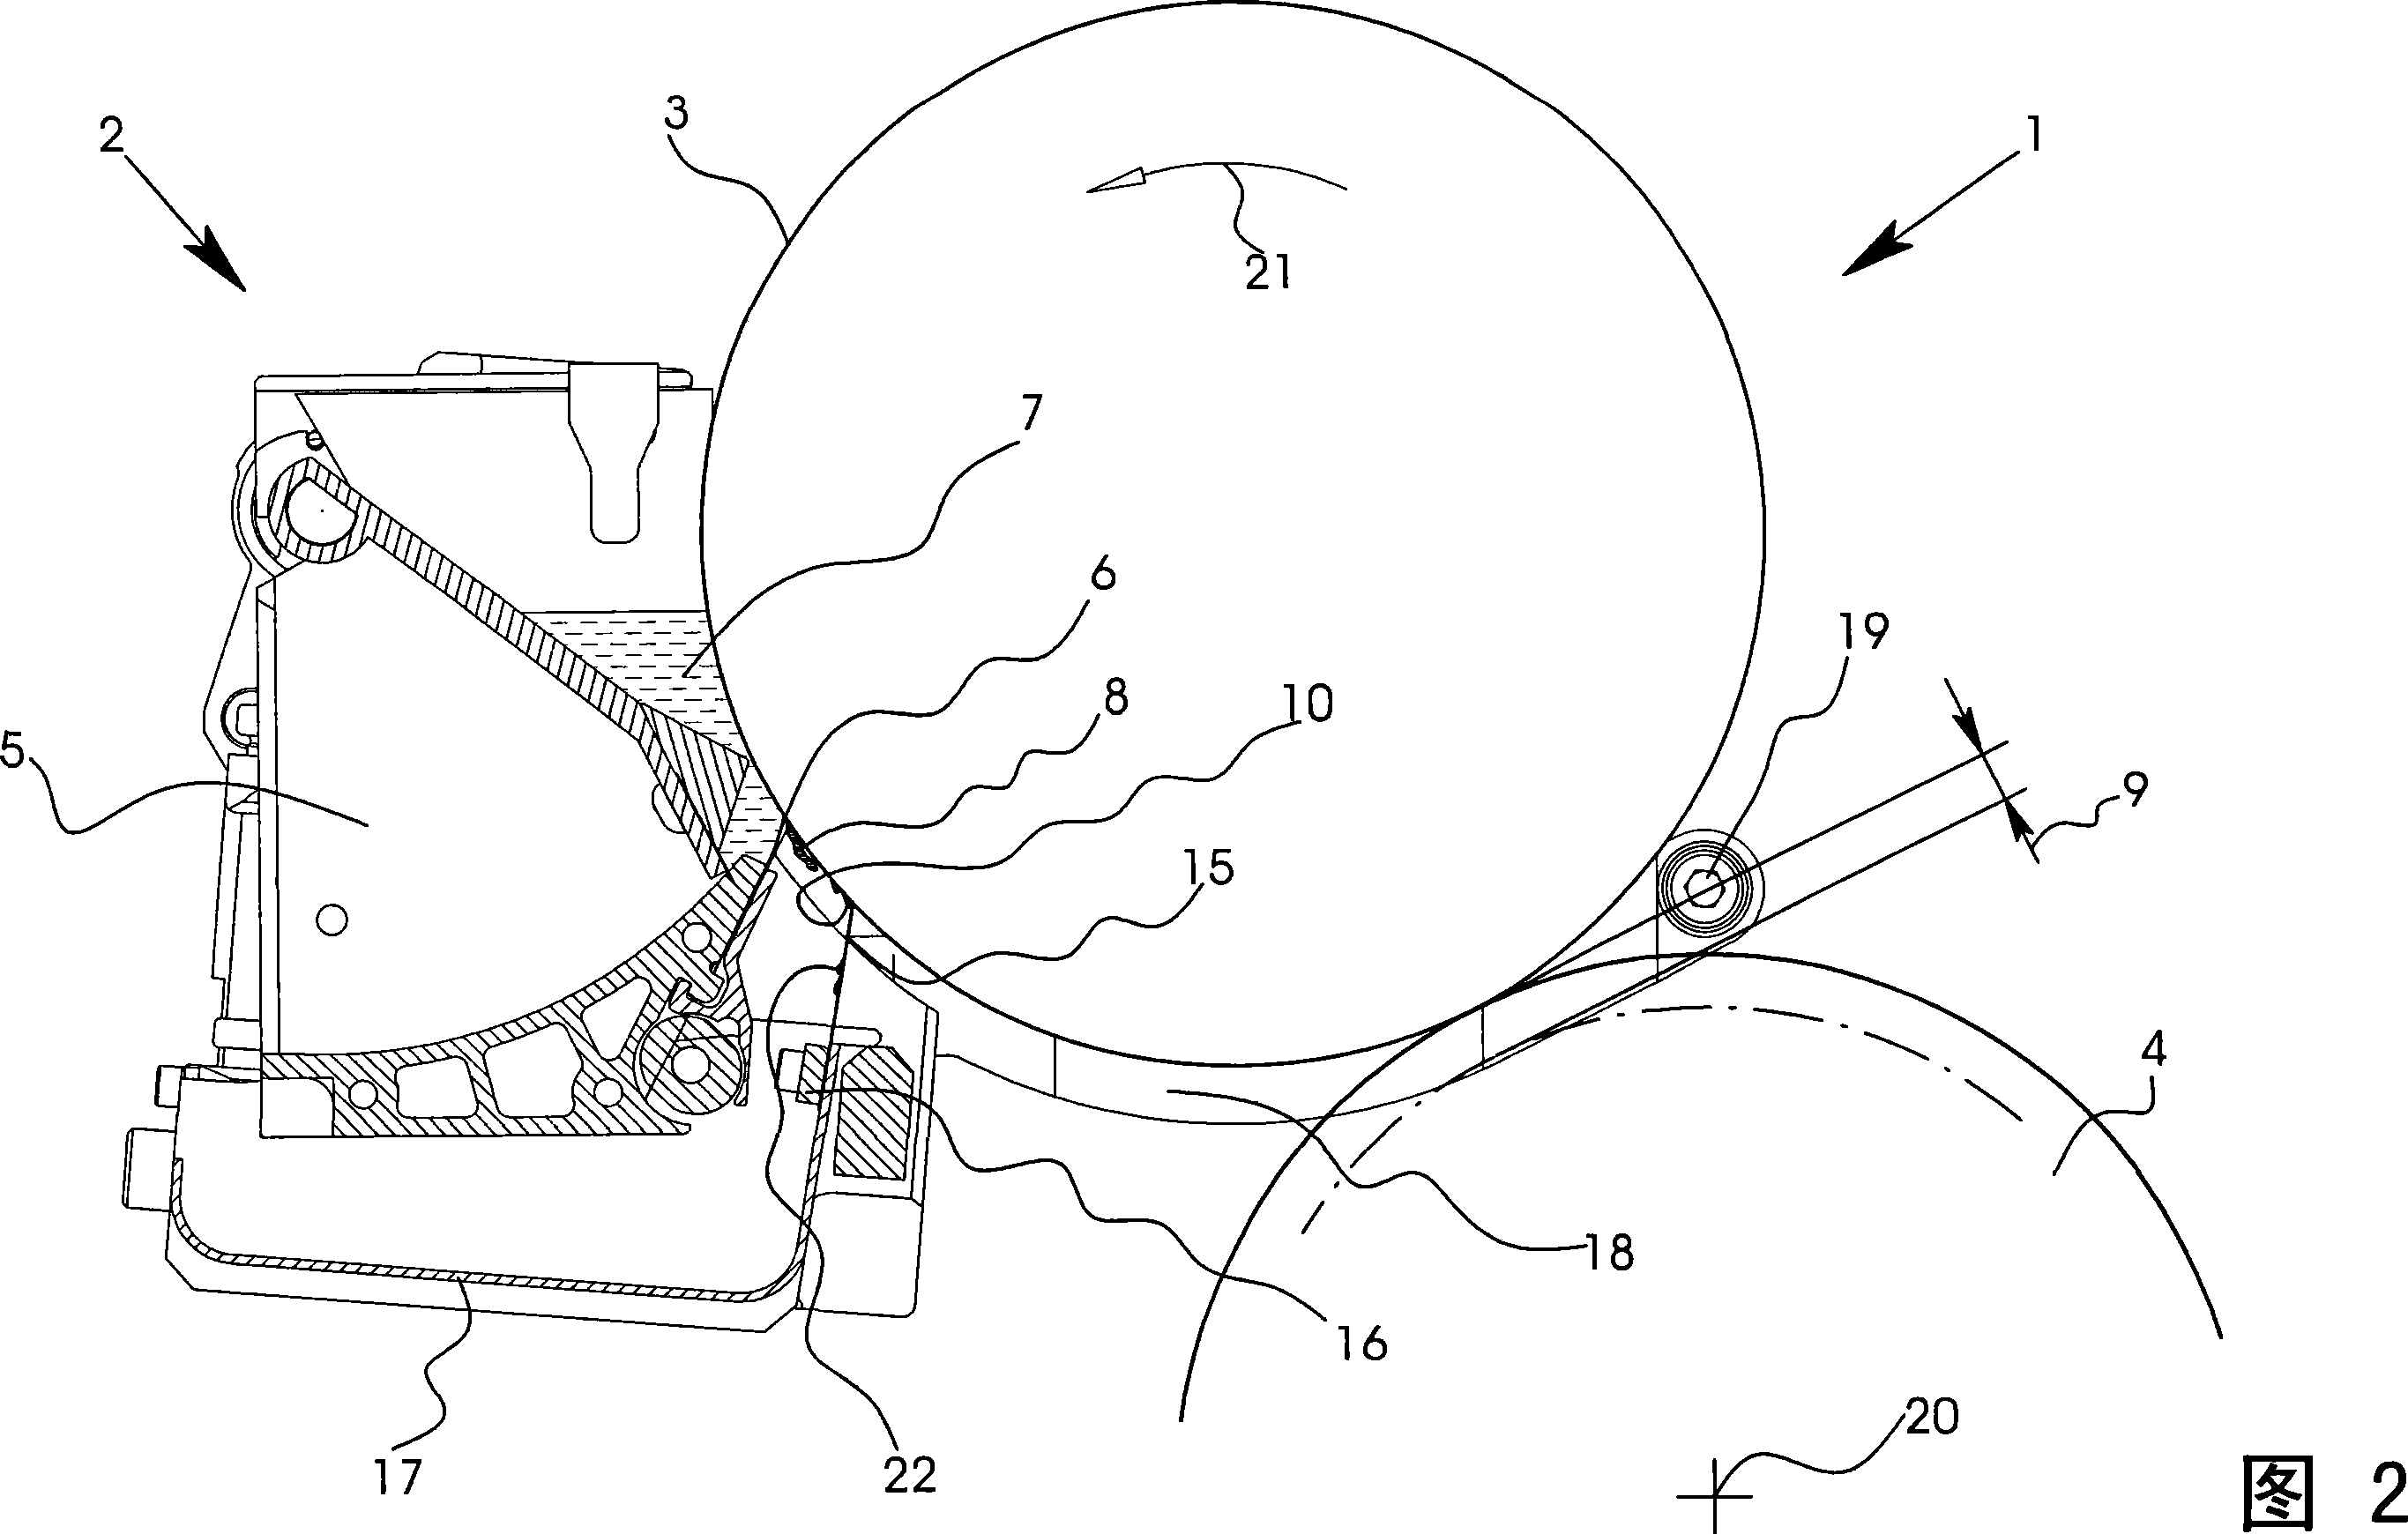 Method for operating an anilox printing unit